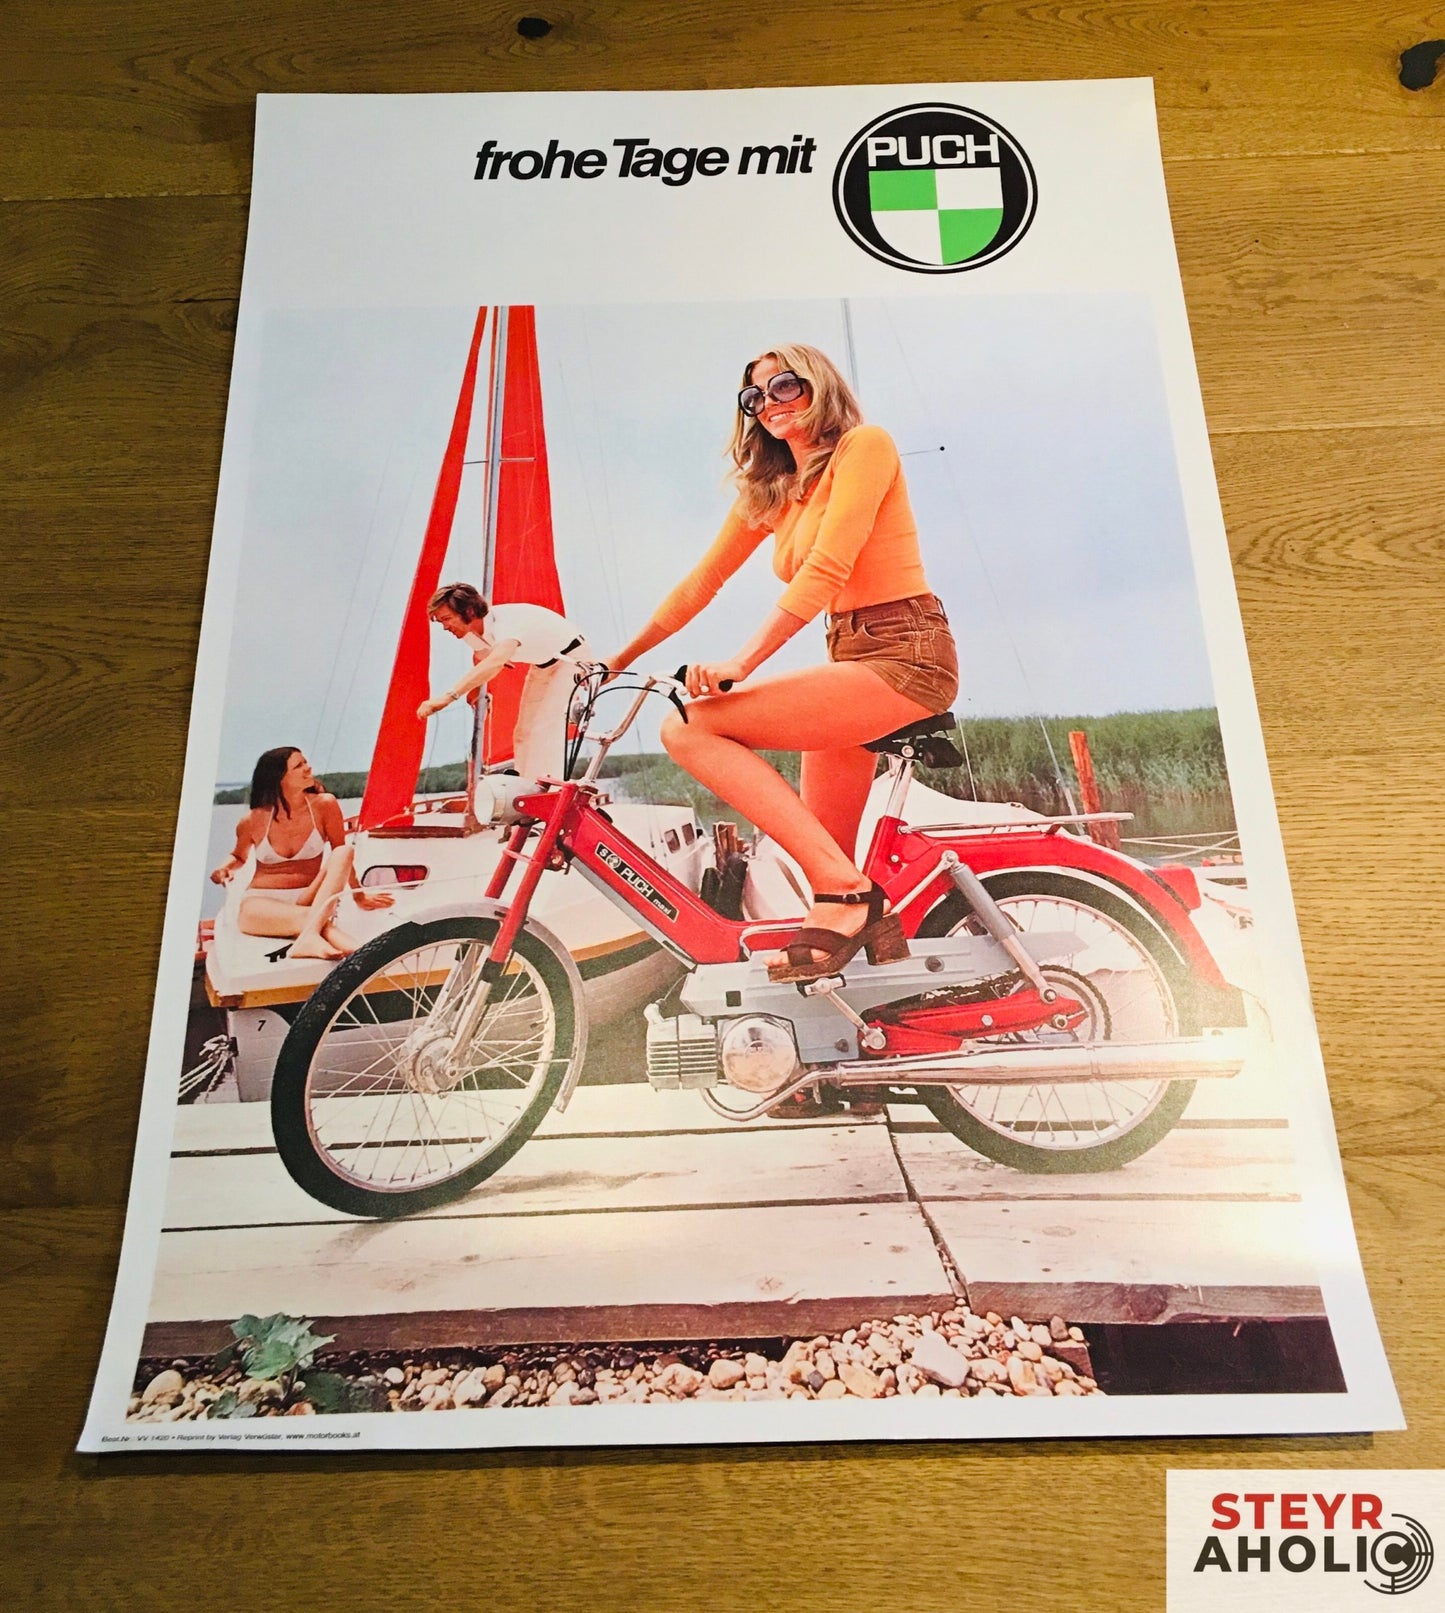 Puch "Frohe Tage mit Puch"